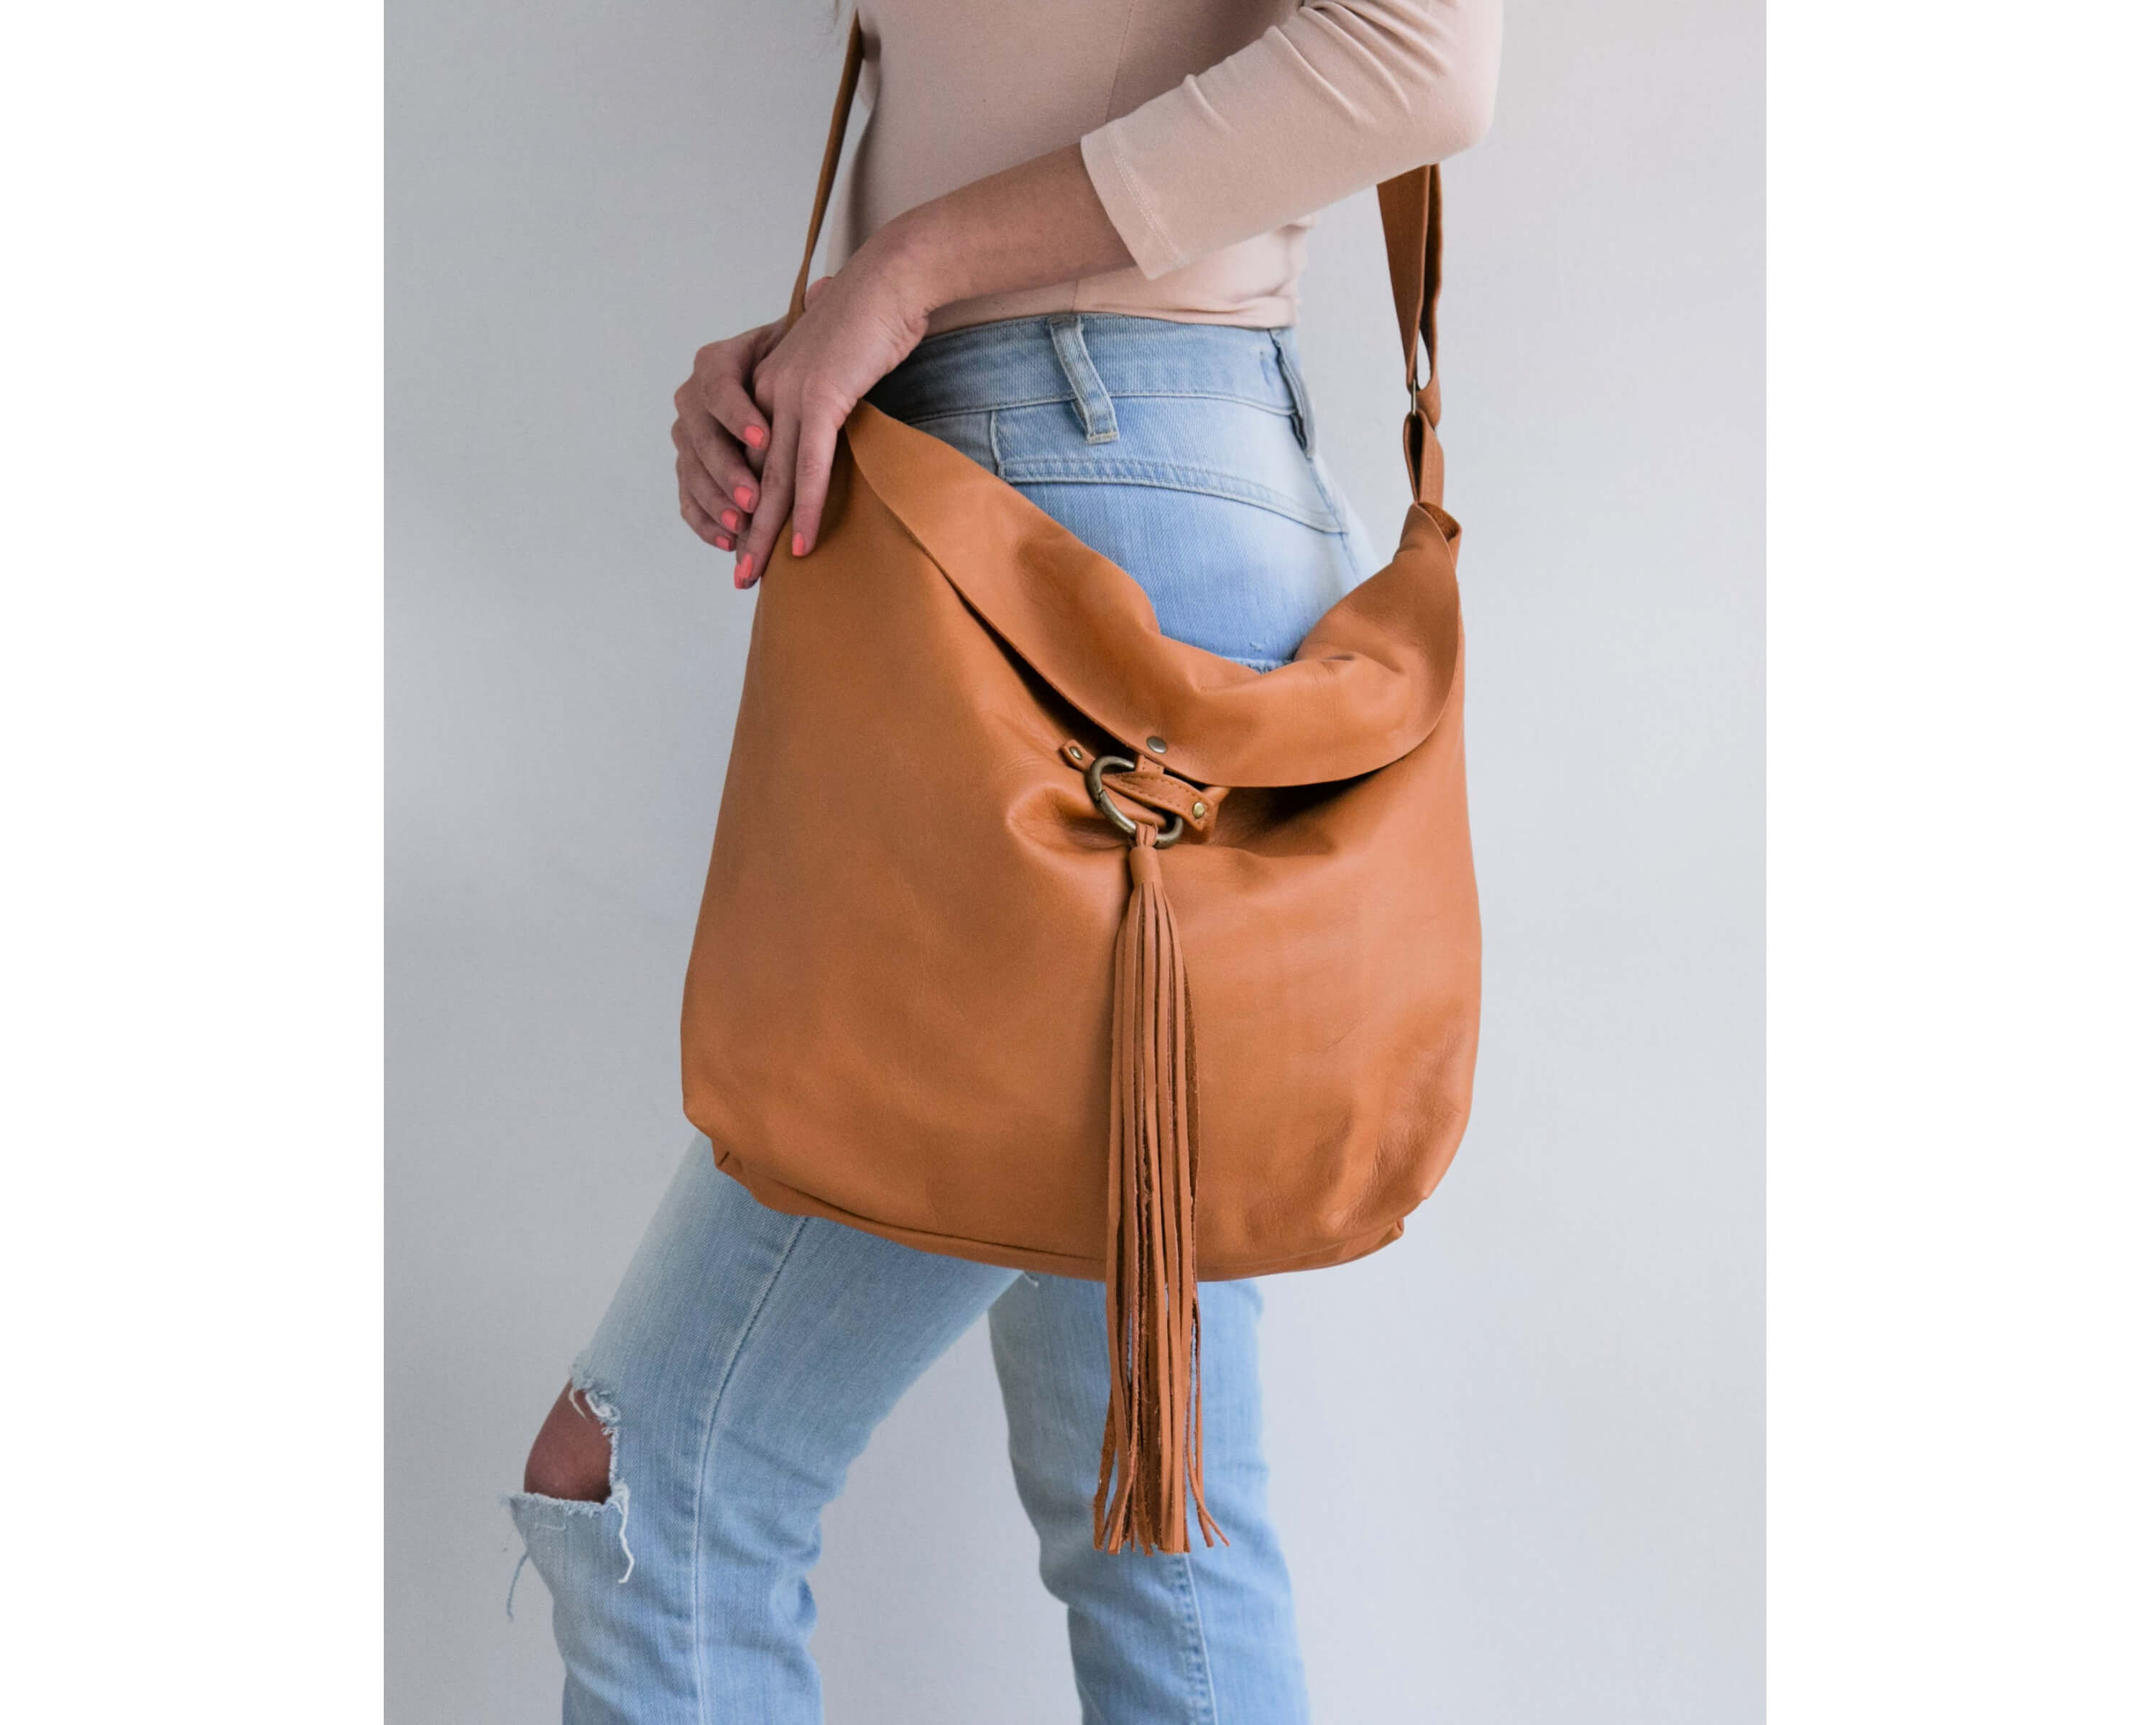 Leather Crossbody Bag Brown Leather Hobo Bag Soft Leather 